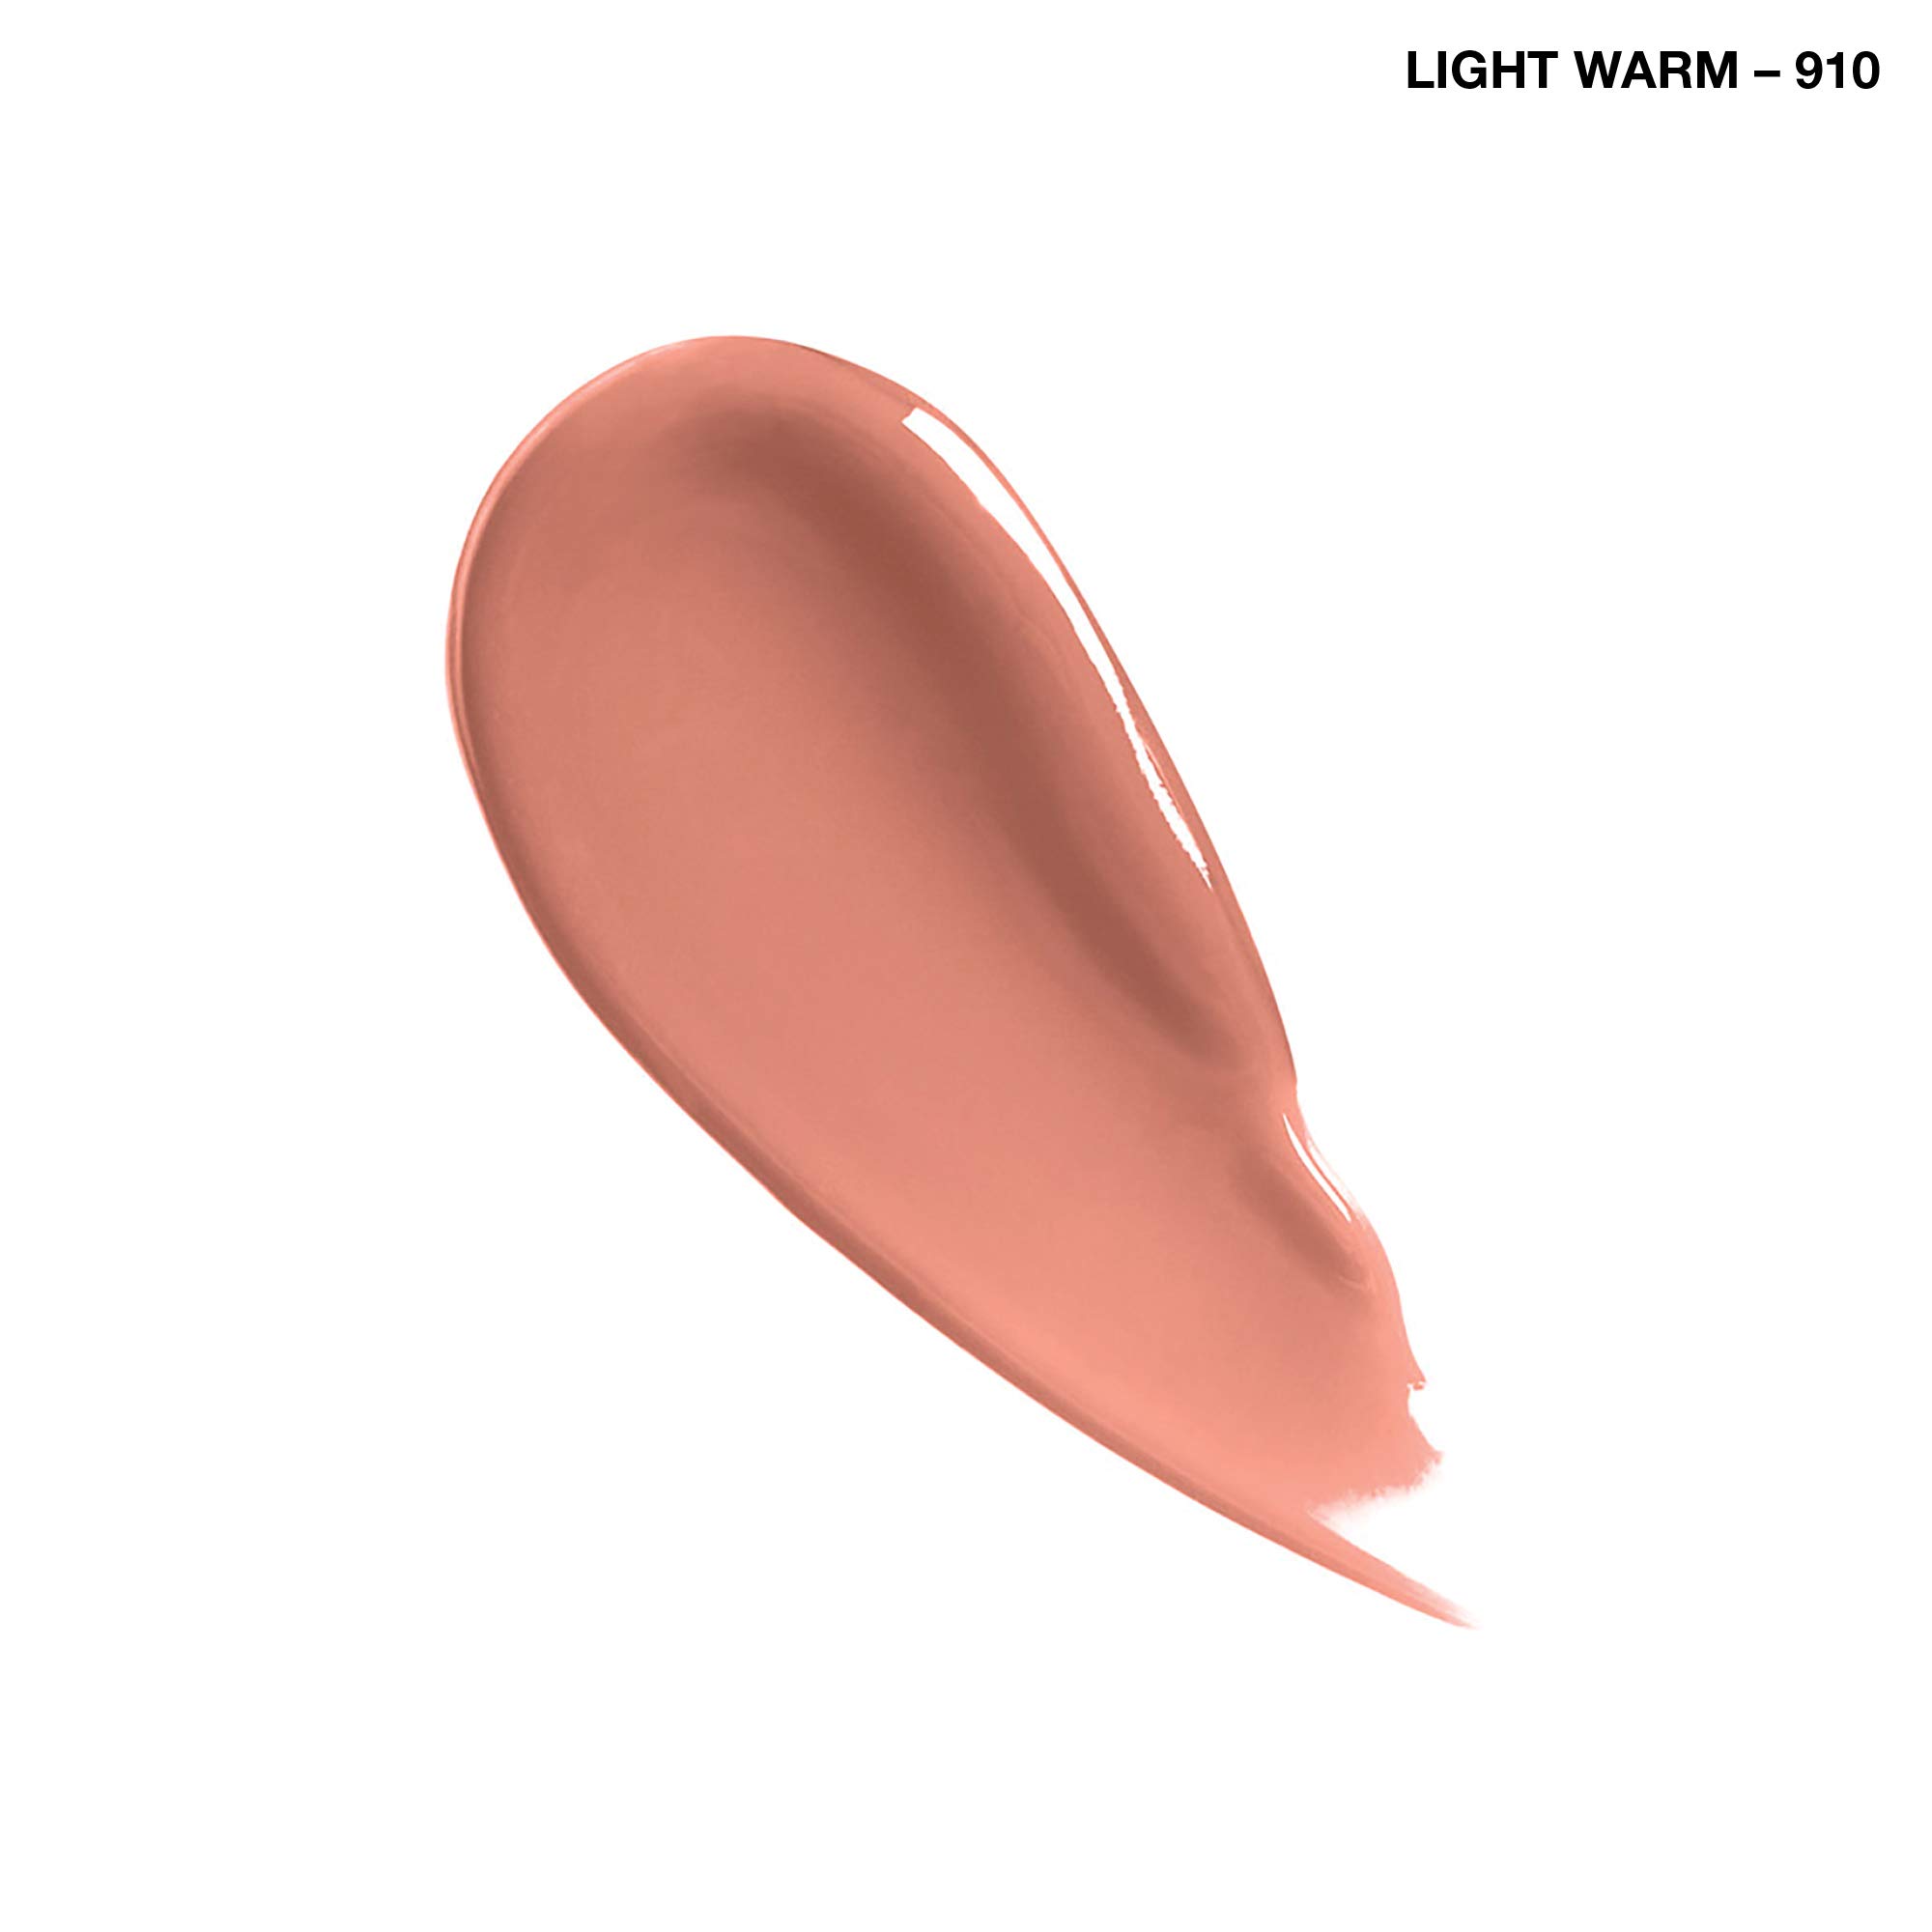 COVERGIRL Outlast All-Day Lip Color Custom Nudes, Light Warm